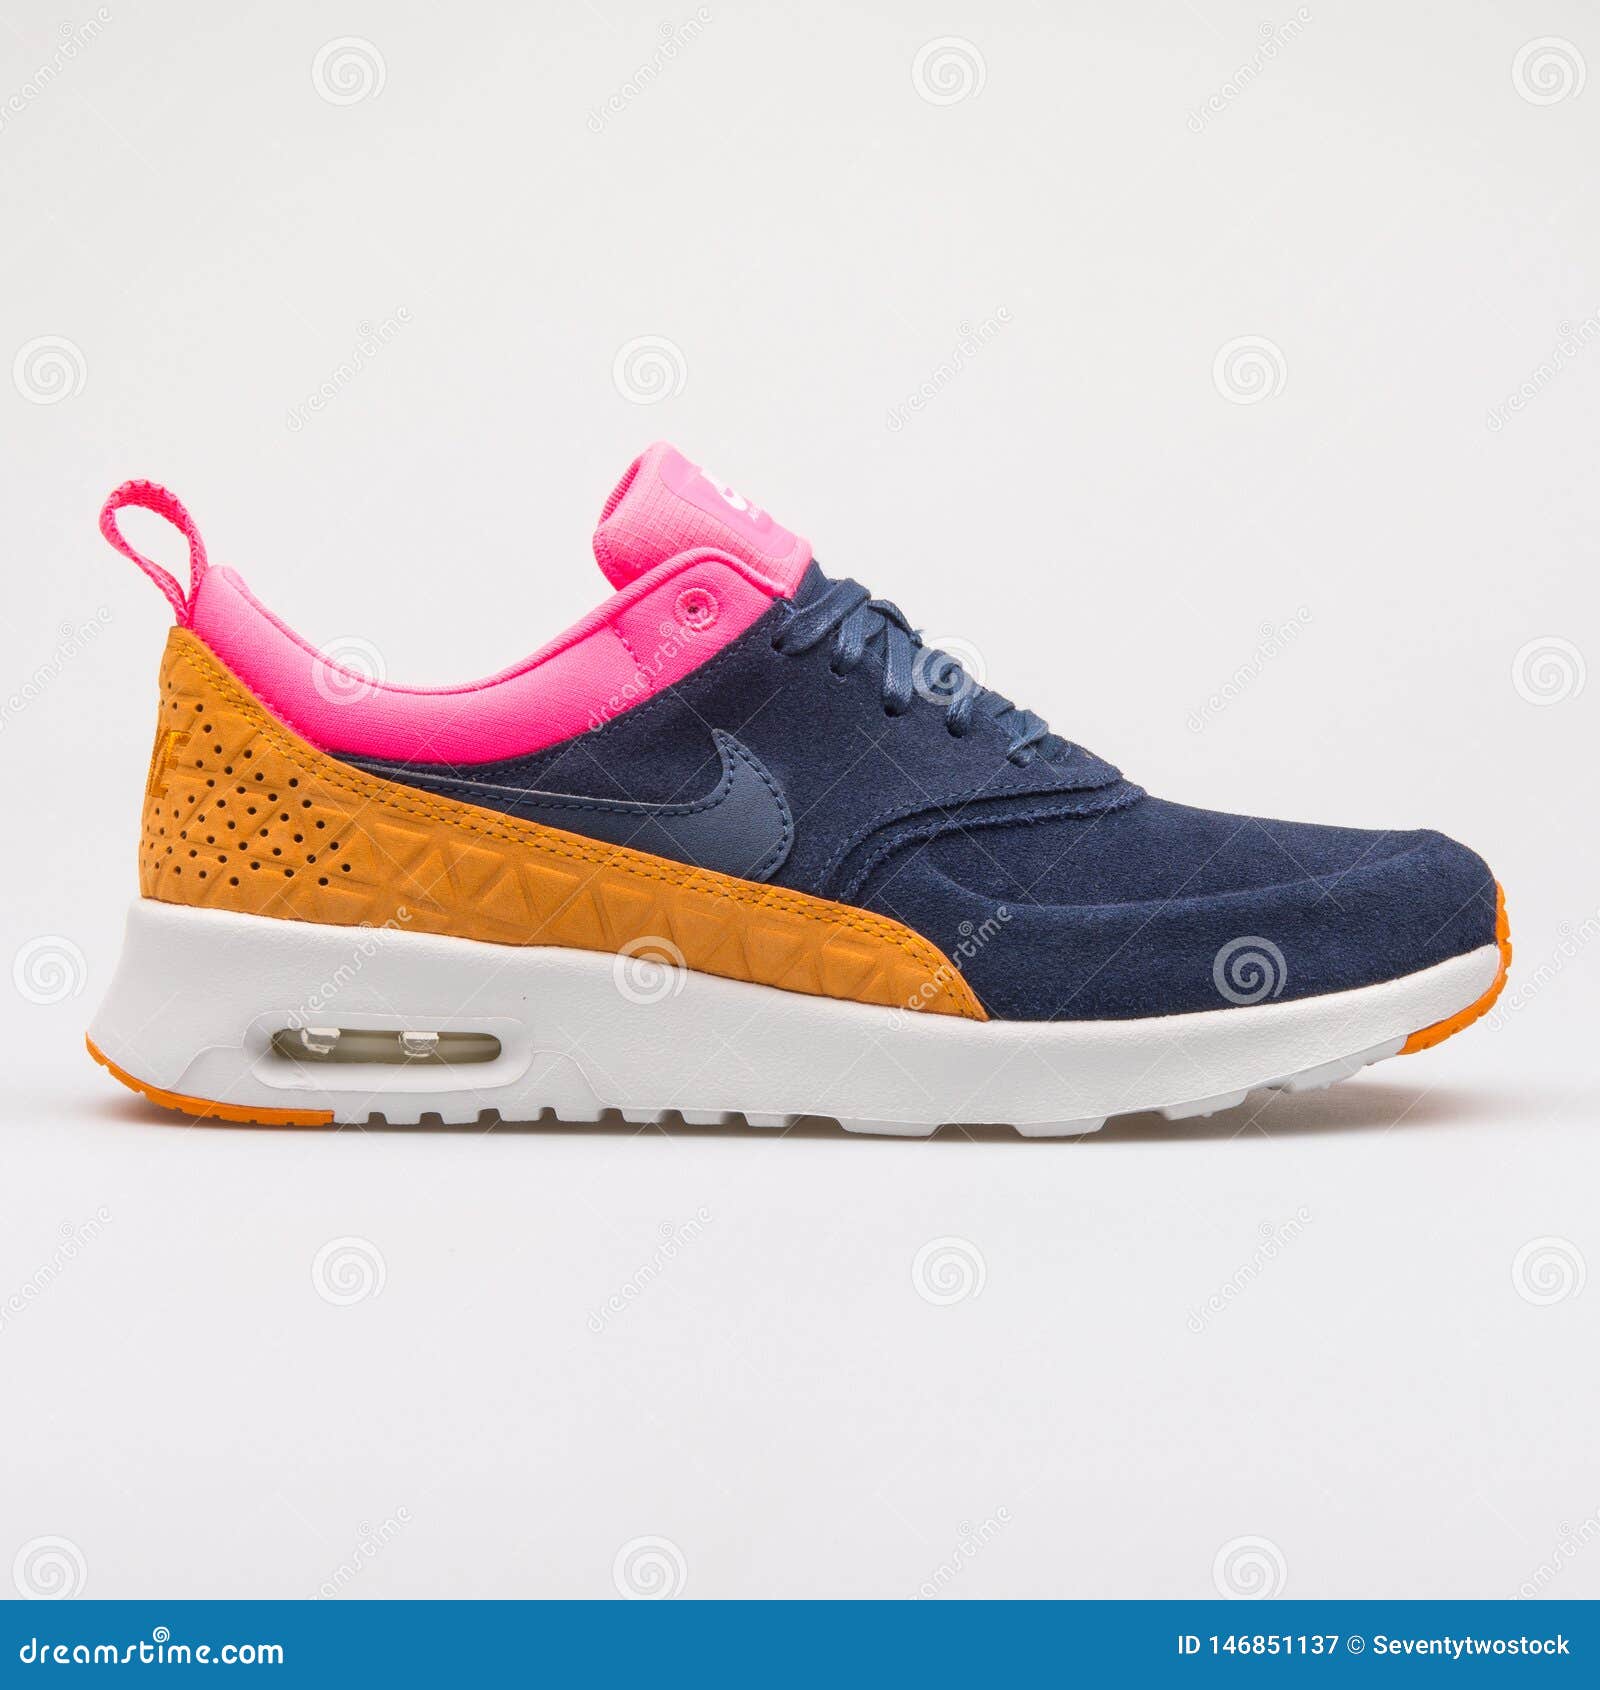 Incesante perder Itaca Nike Air Max Thea Premium Leather Obsidian, Pink and Orange Sneaker  Editorial Photography - Image of kicks, isolated: 146851137